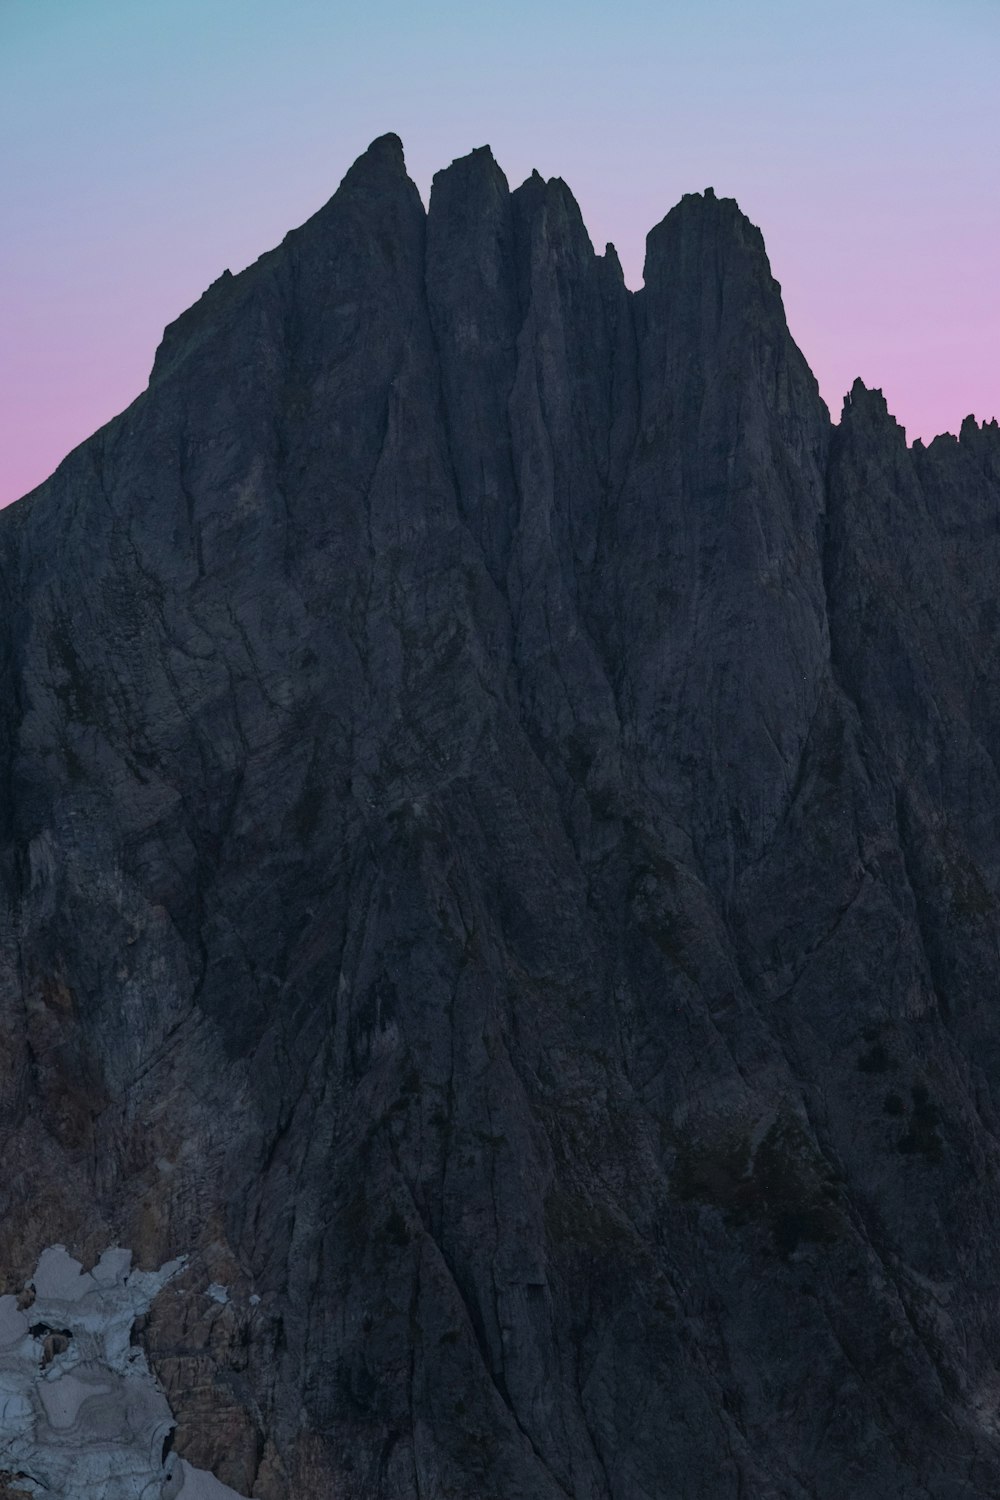 a very tall mountain with a pink sky in the background